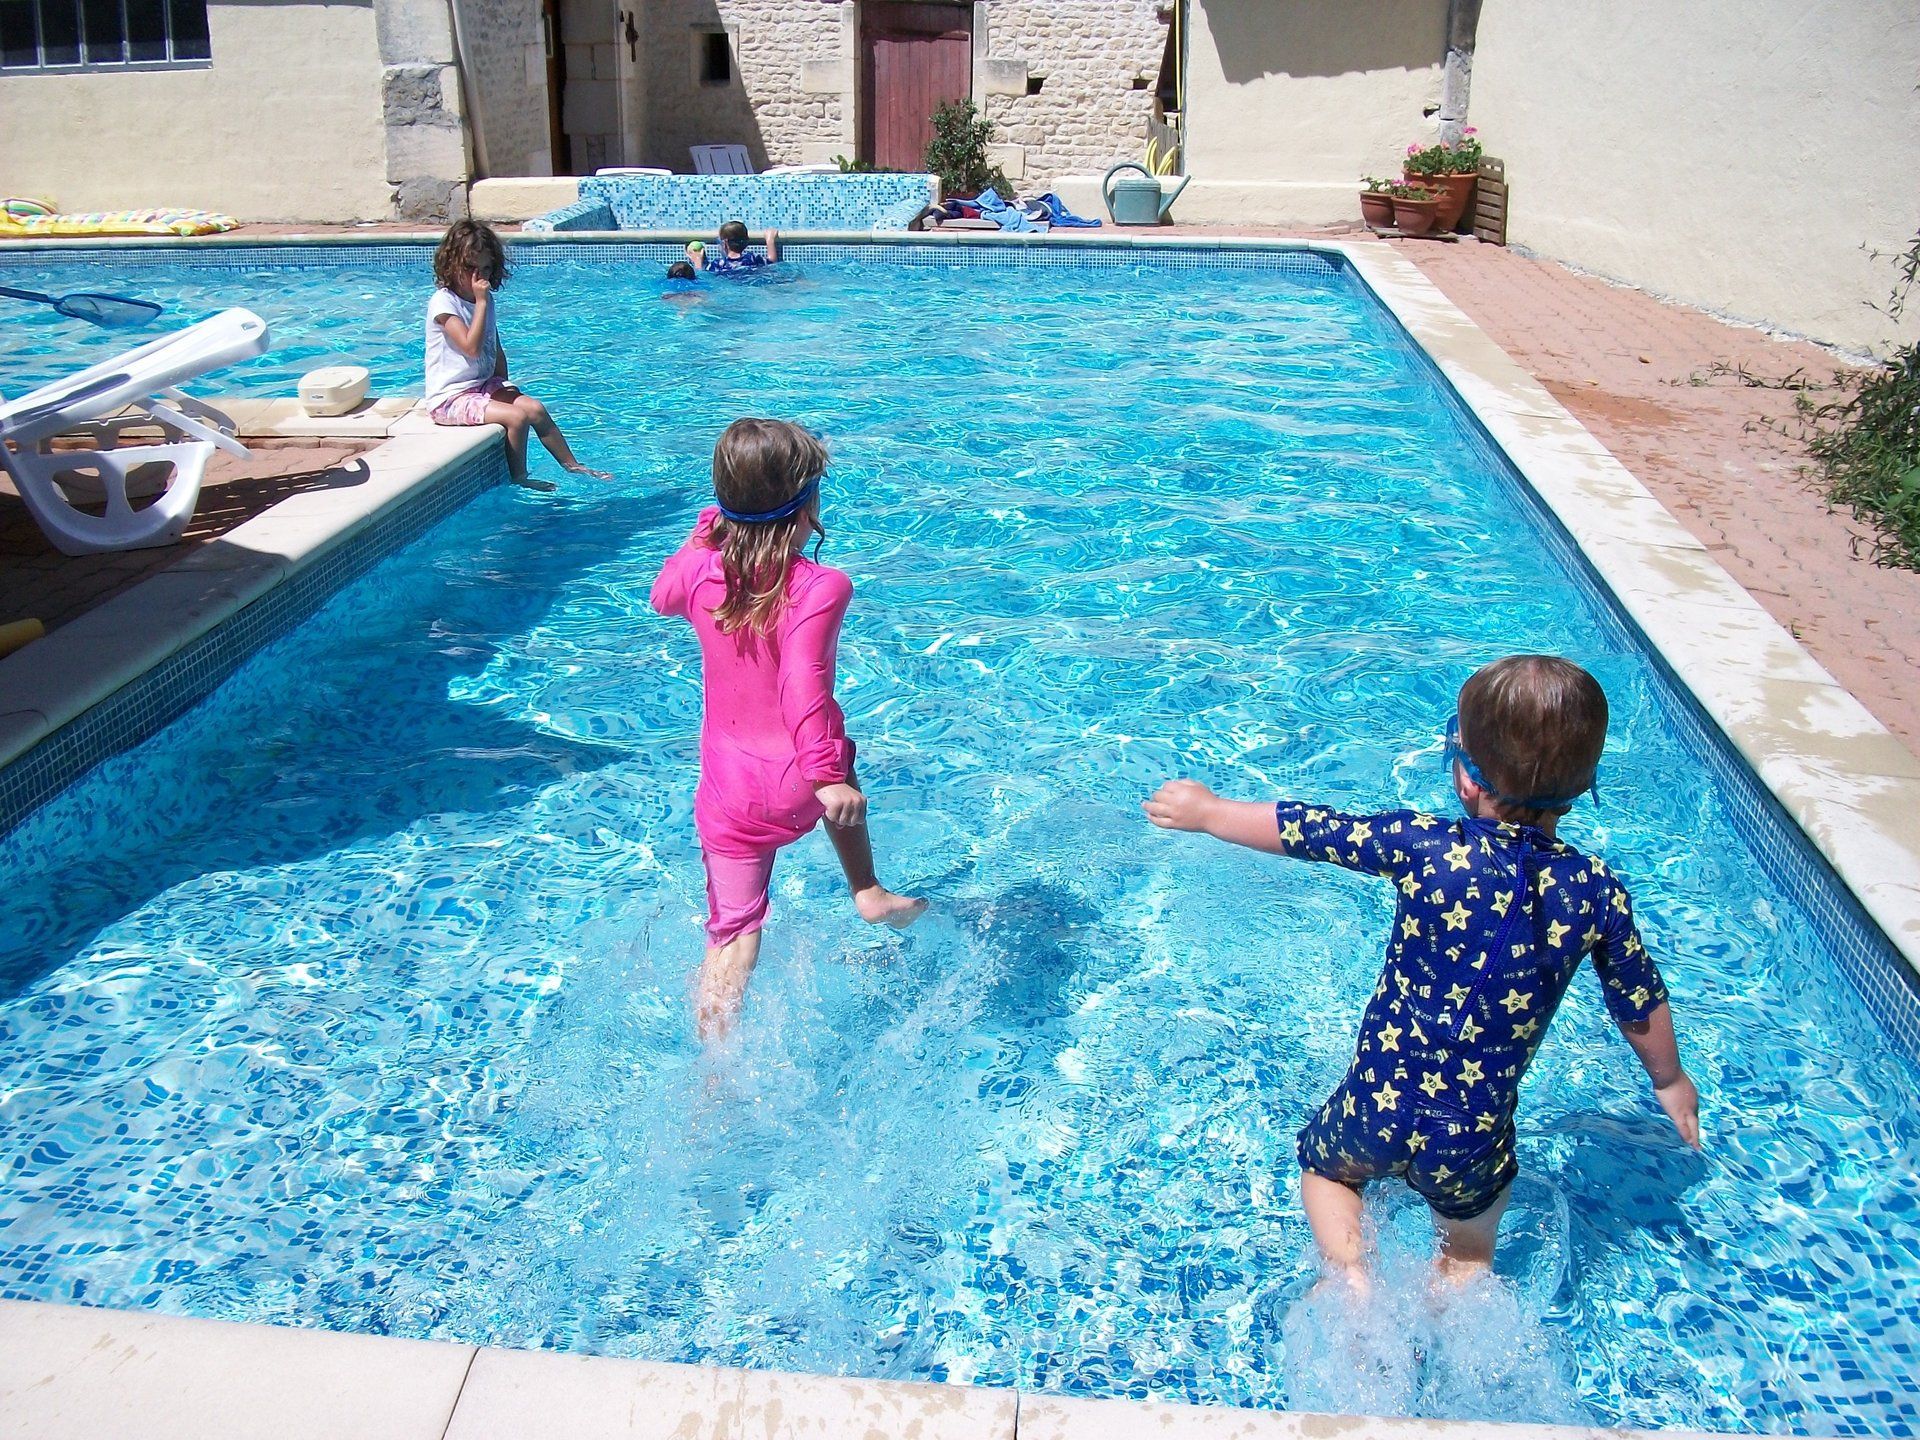 two young children wearing bright sun suits running into a shallow swimming pool